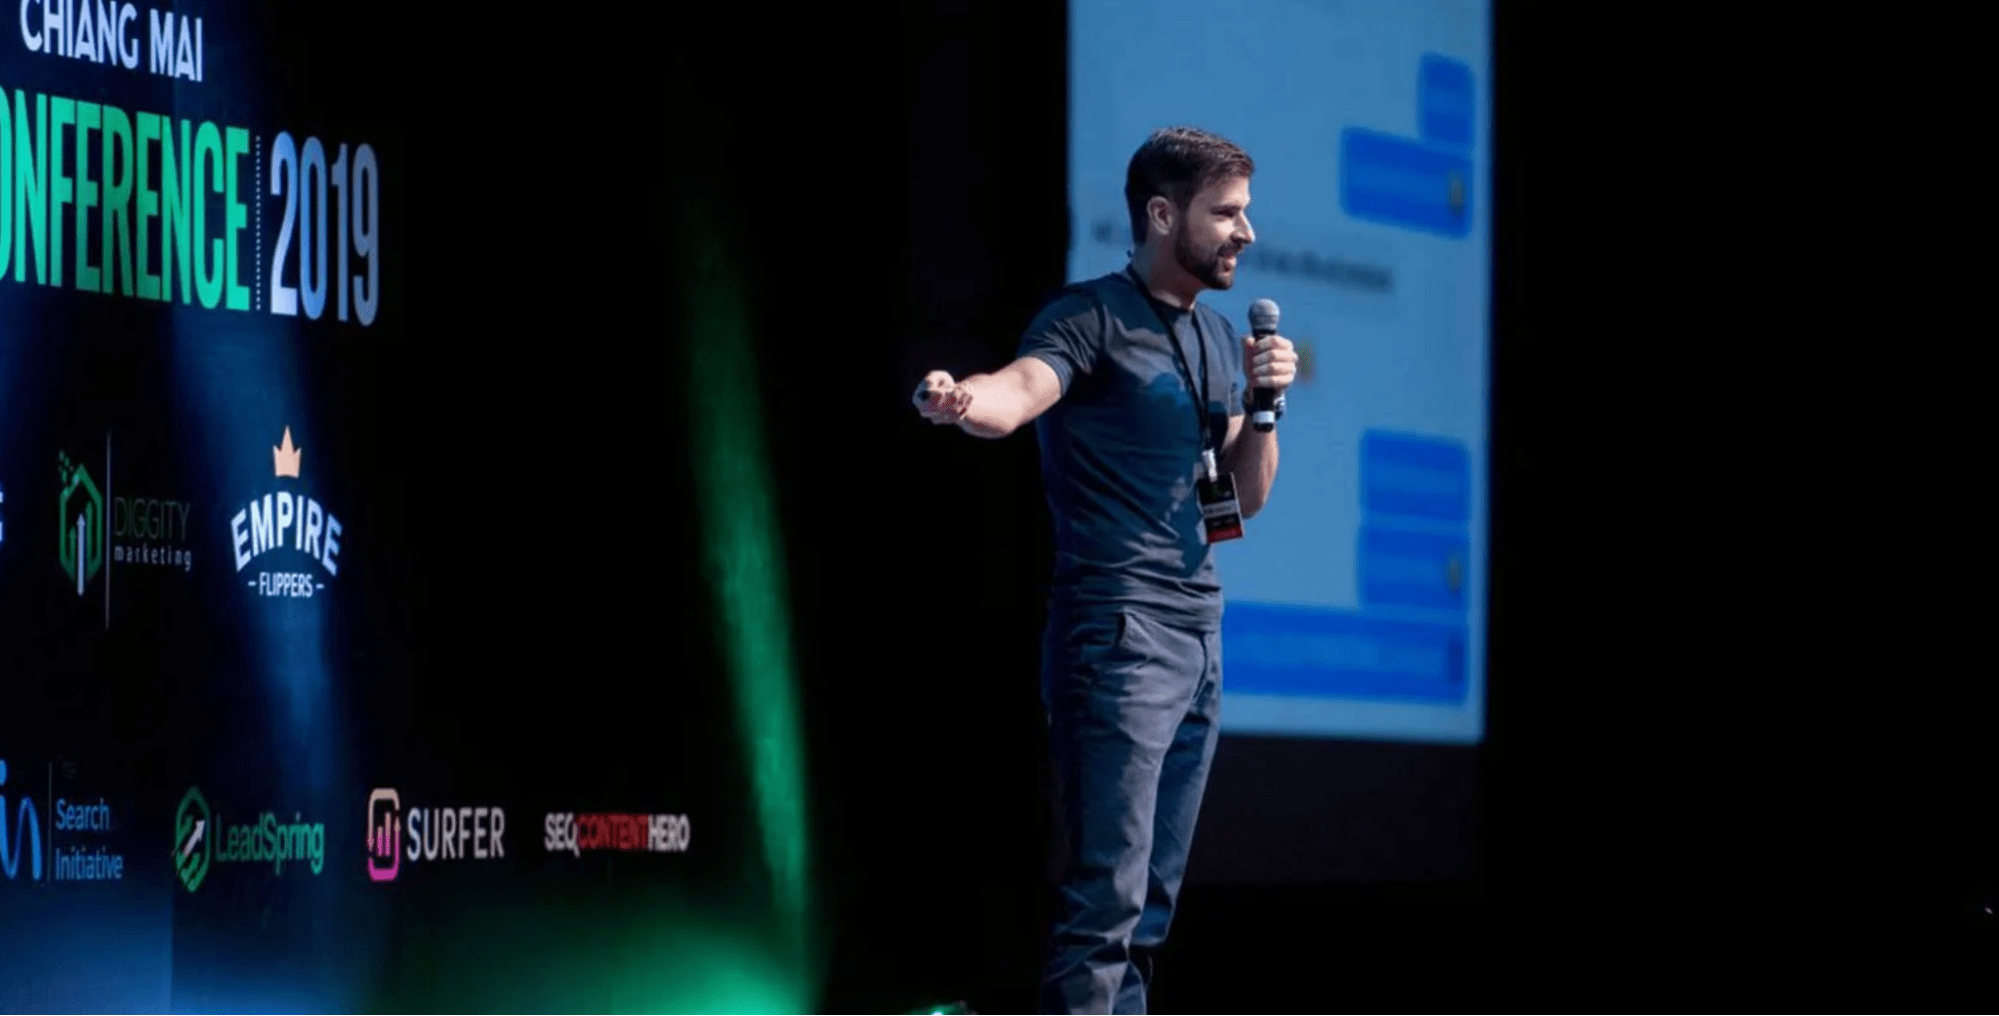 Ahrefs CMO Tim Soulo speaking at the Chiang Mai SEO Conference in 2019